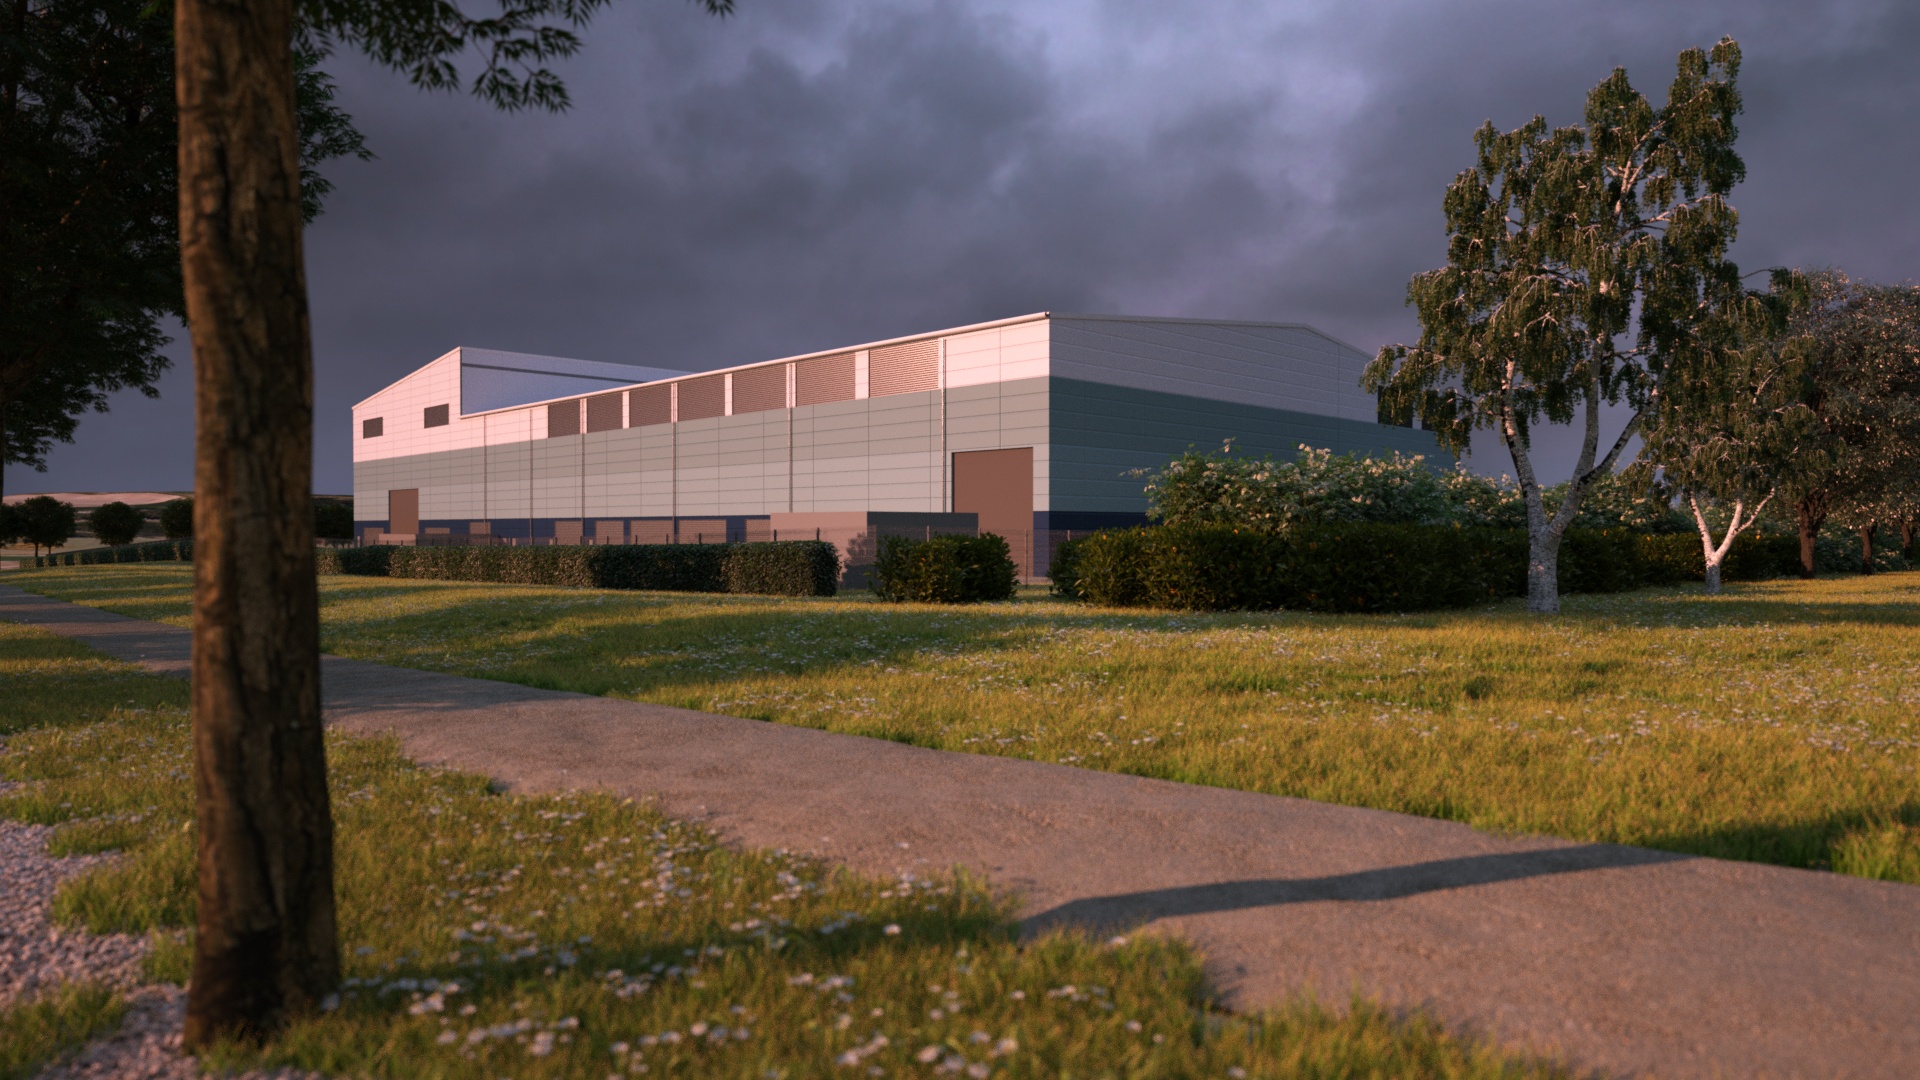 Global Infrastructure lands design & construction contract for SSEN Transmission warehouses